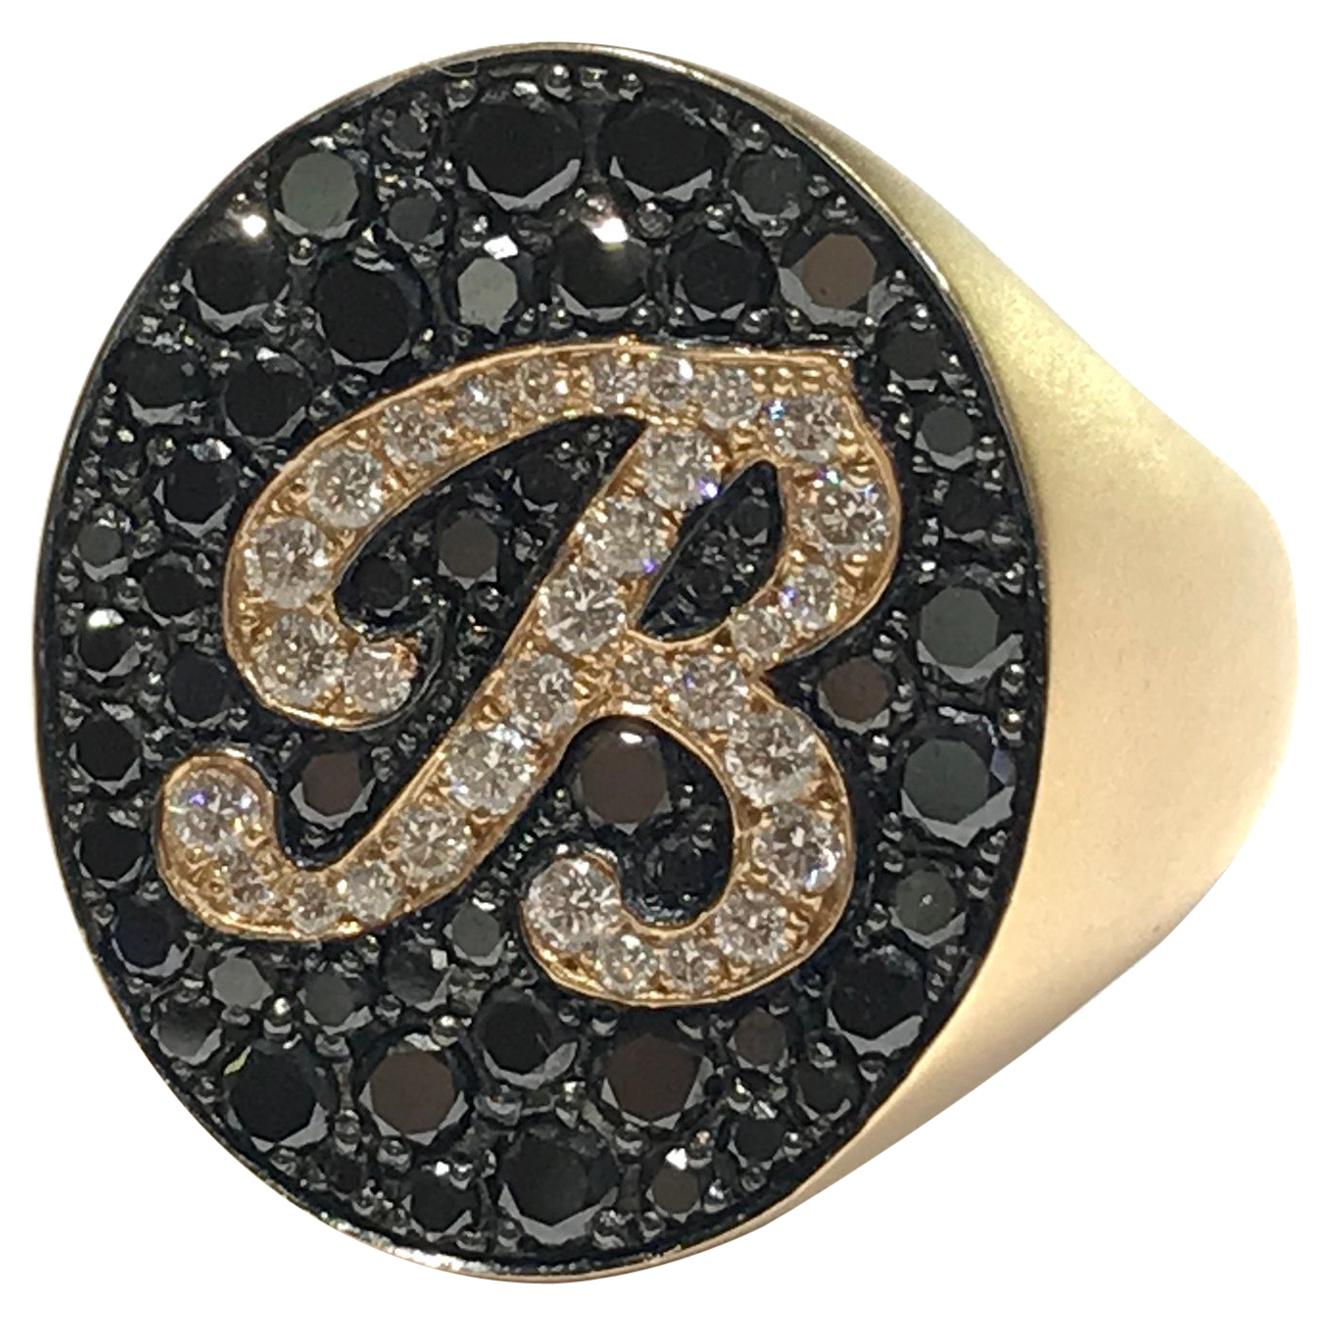 Crivelli Italian Made Black and White Diamond B Ring in 18 Carat R/G For Sale